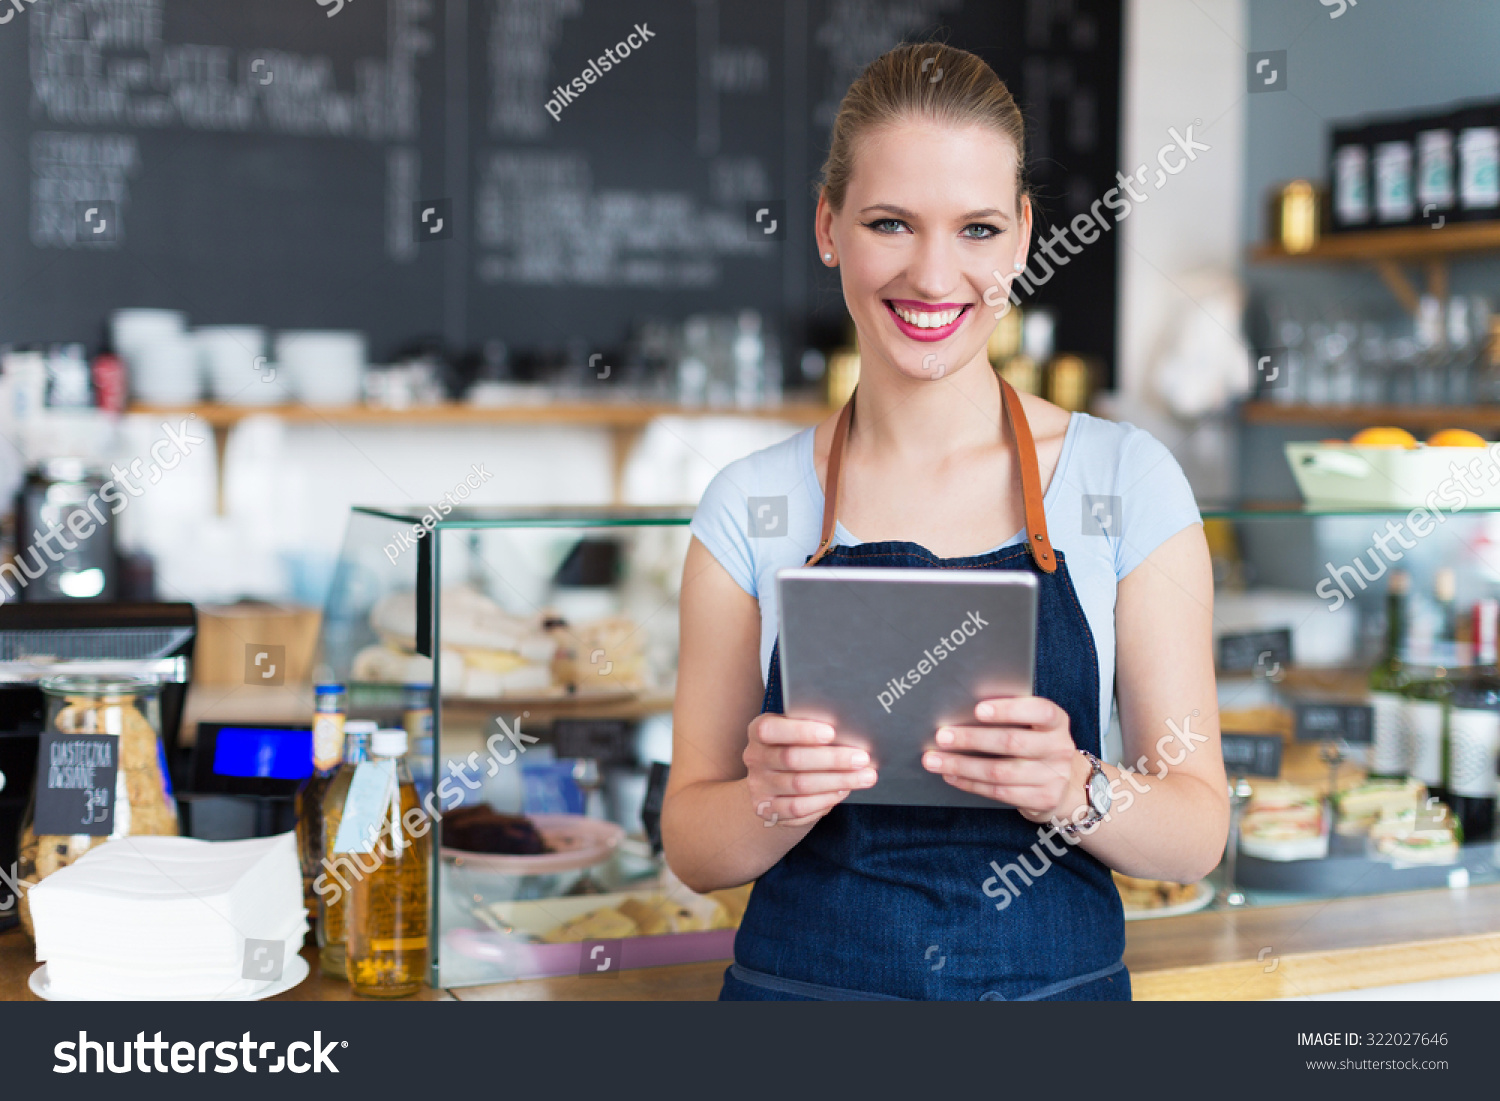 Woman working at cafe #322027646